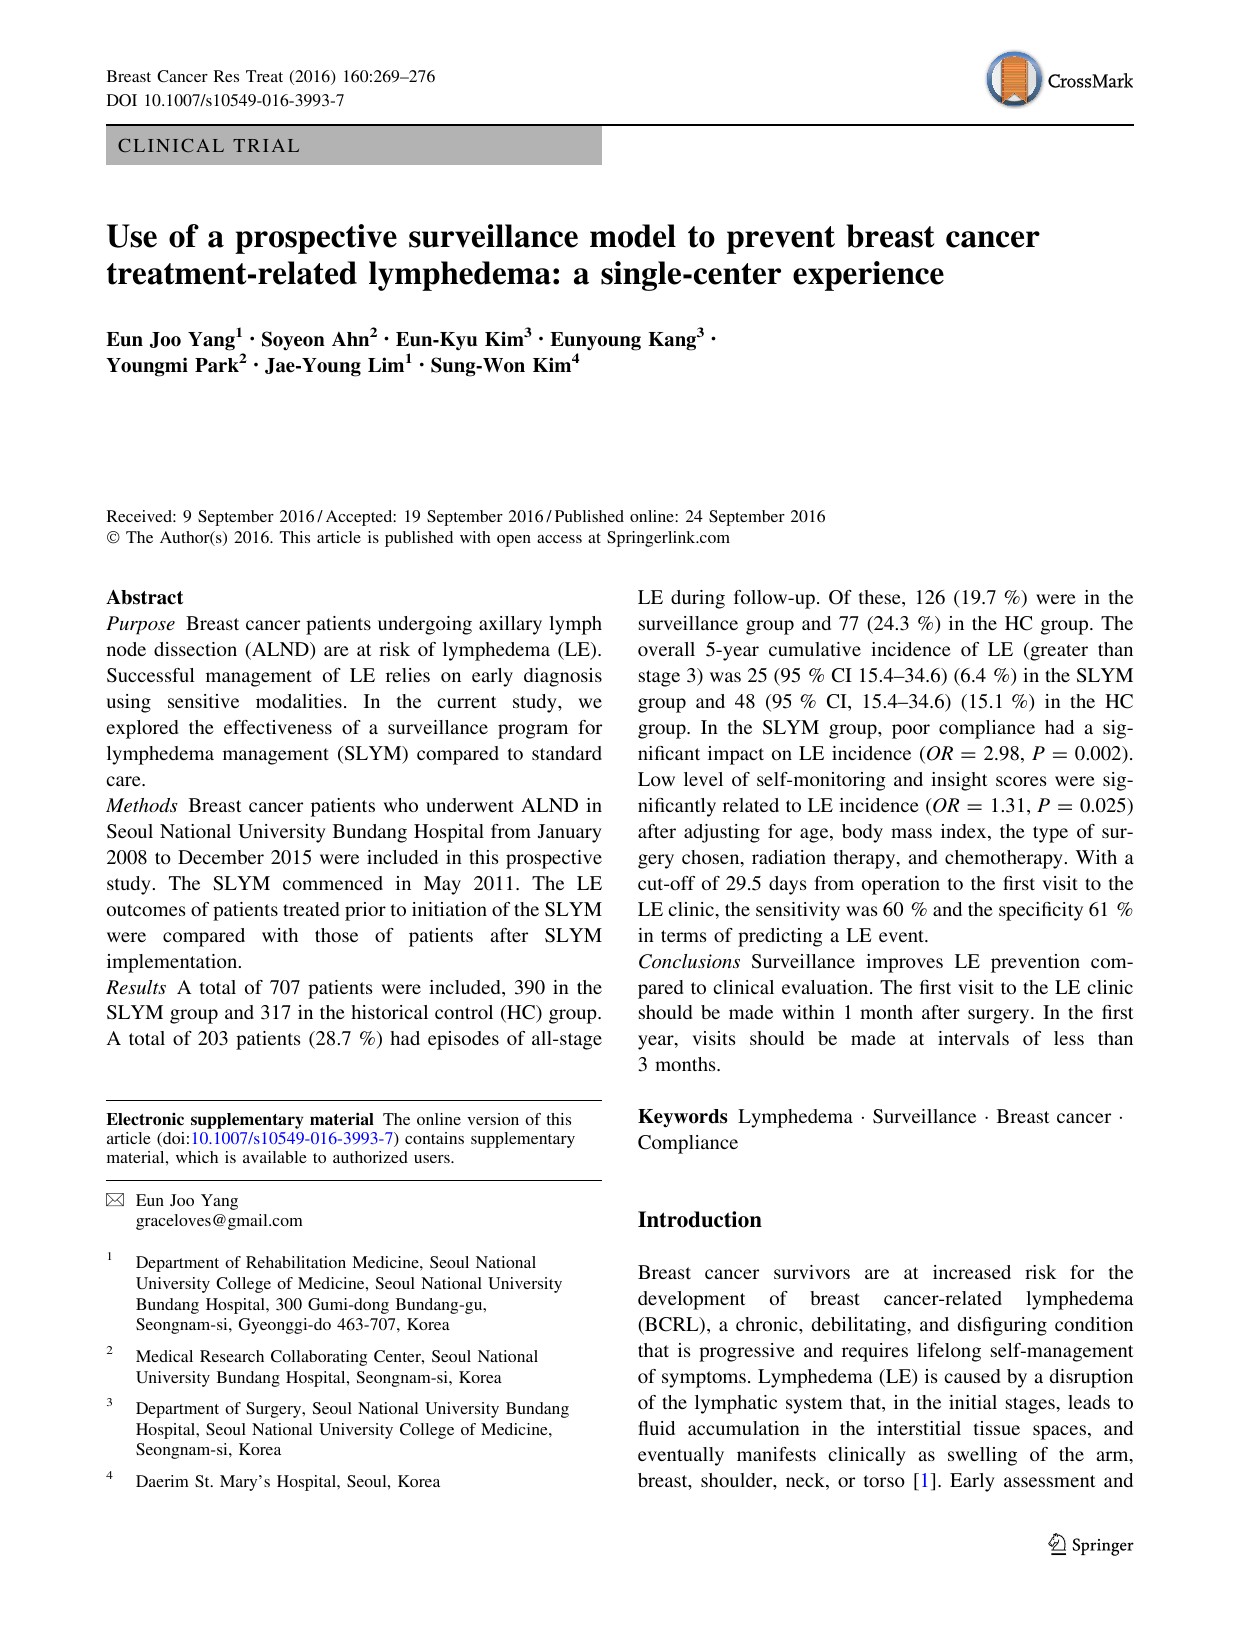 Use of a prospective surveillance model to prevent breast cancer treatment-related lymphedema: a single-center experience